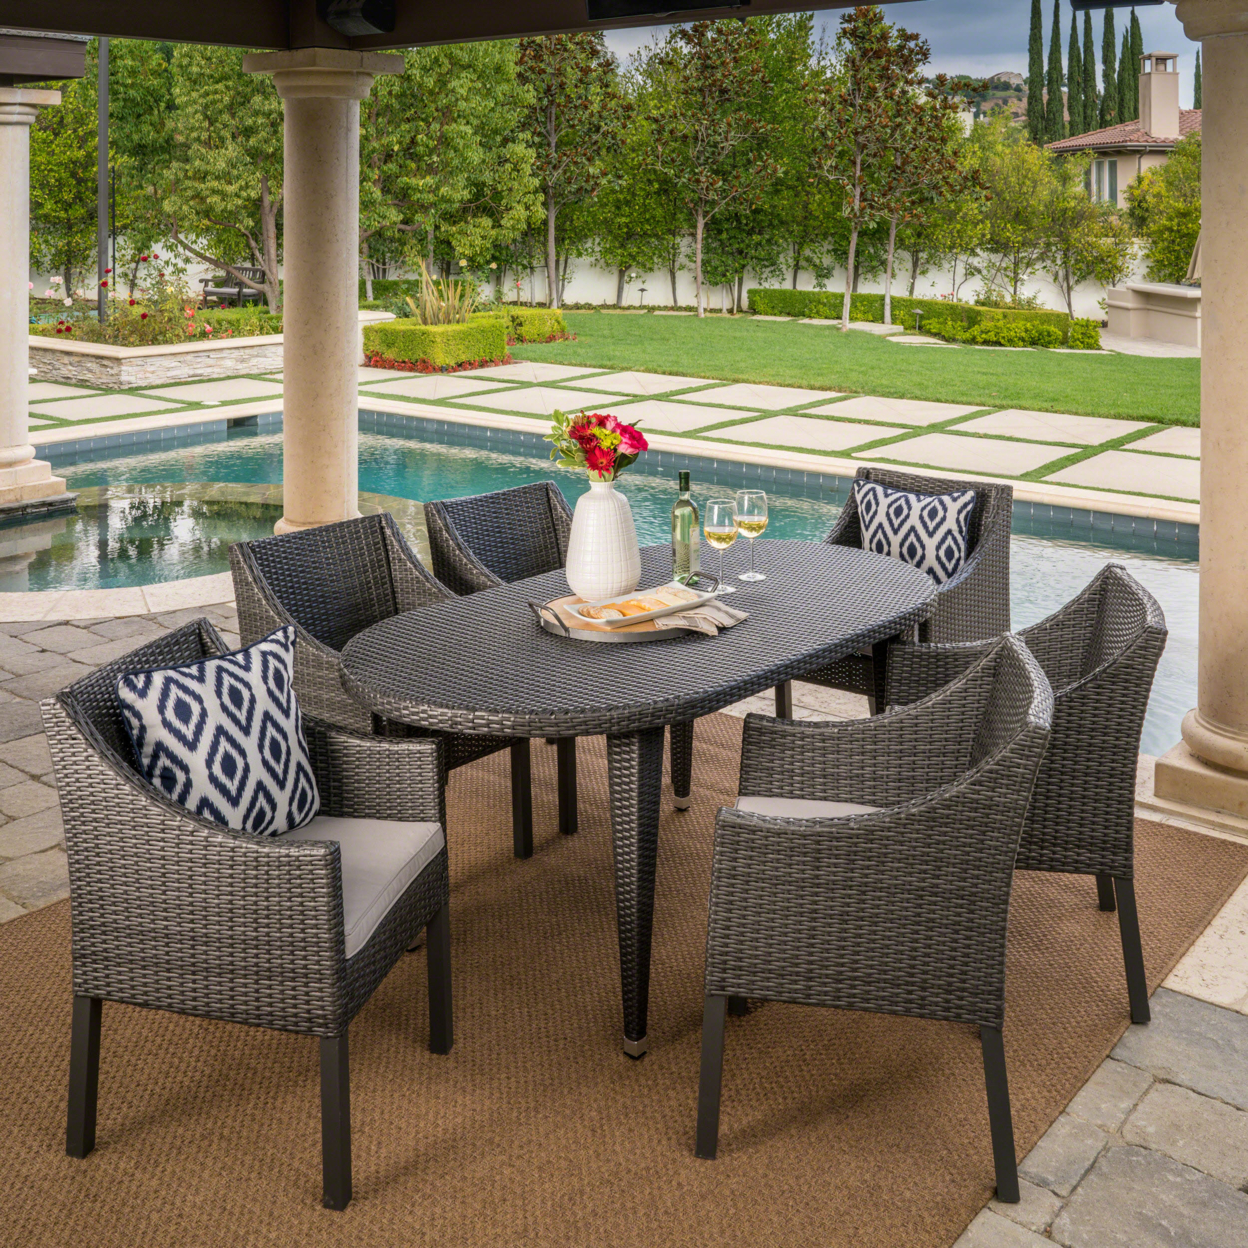 Nicholas Outdoor 7 Piece Wicker Oval Dining Set With Water Resistant Cushions - Multi-brown/Beige